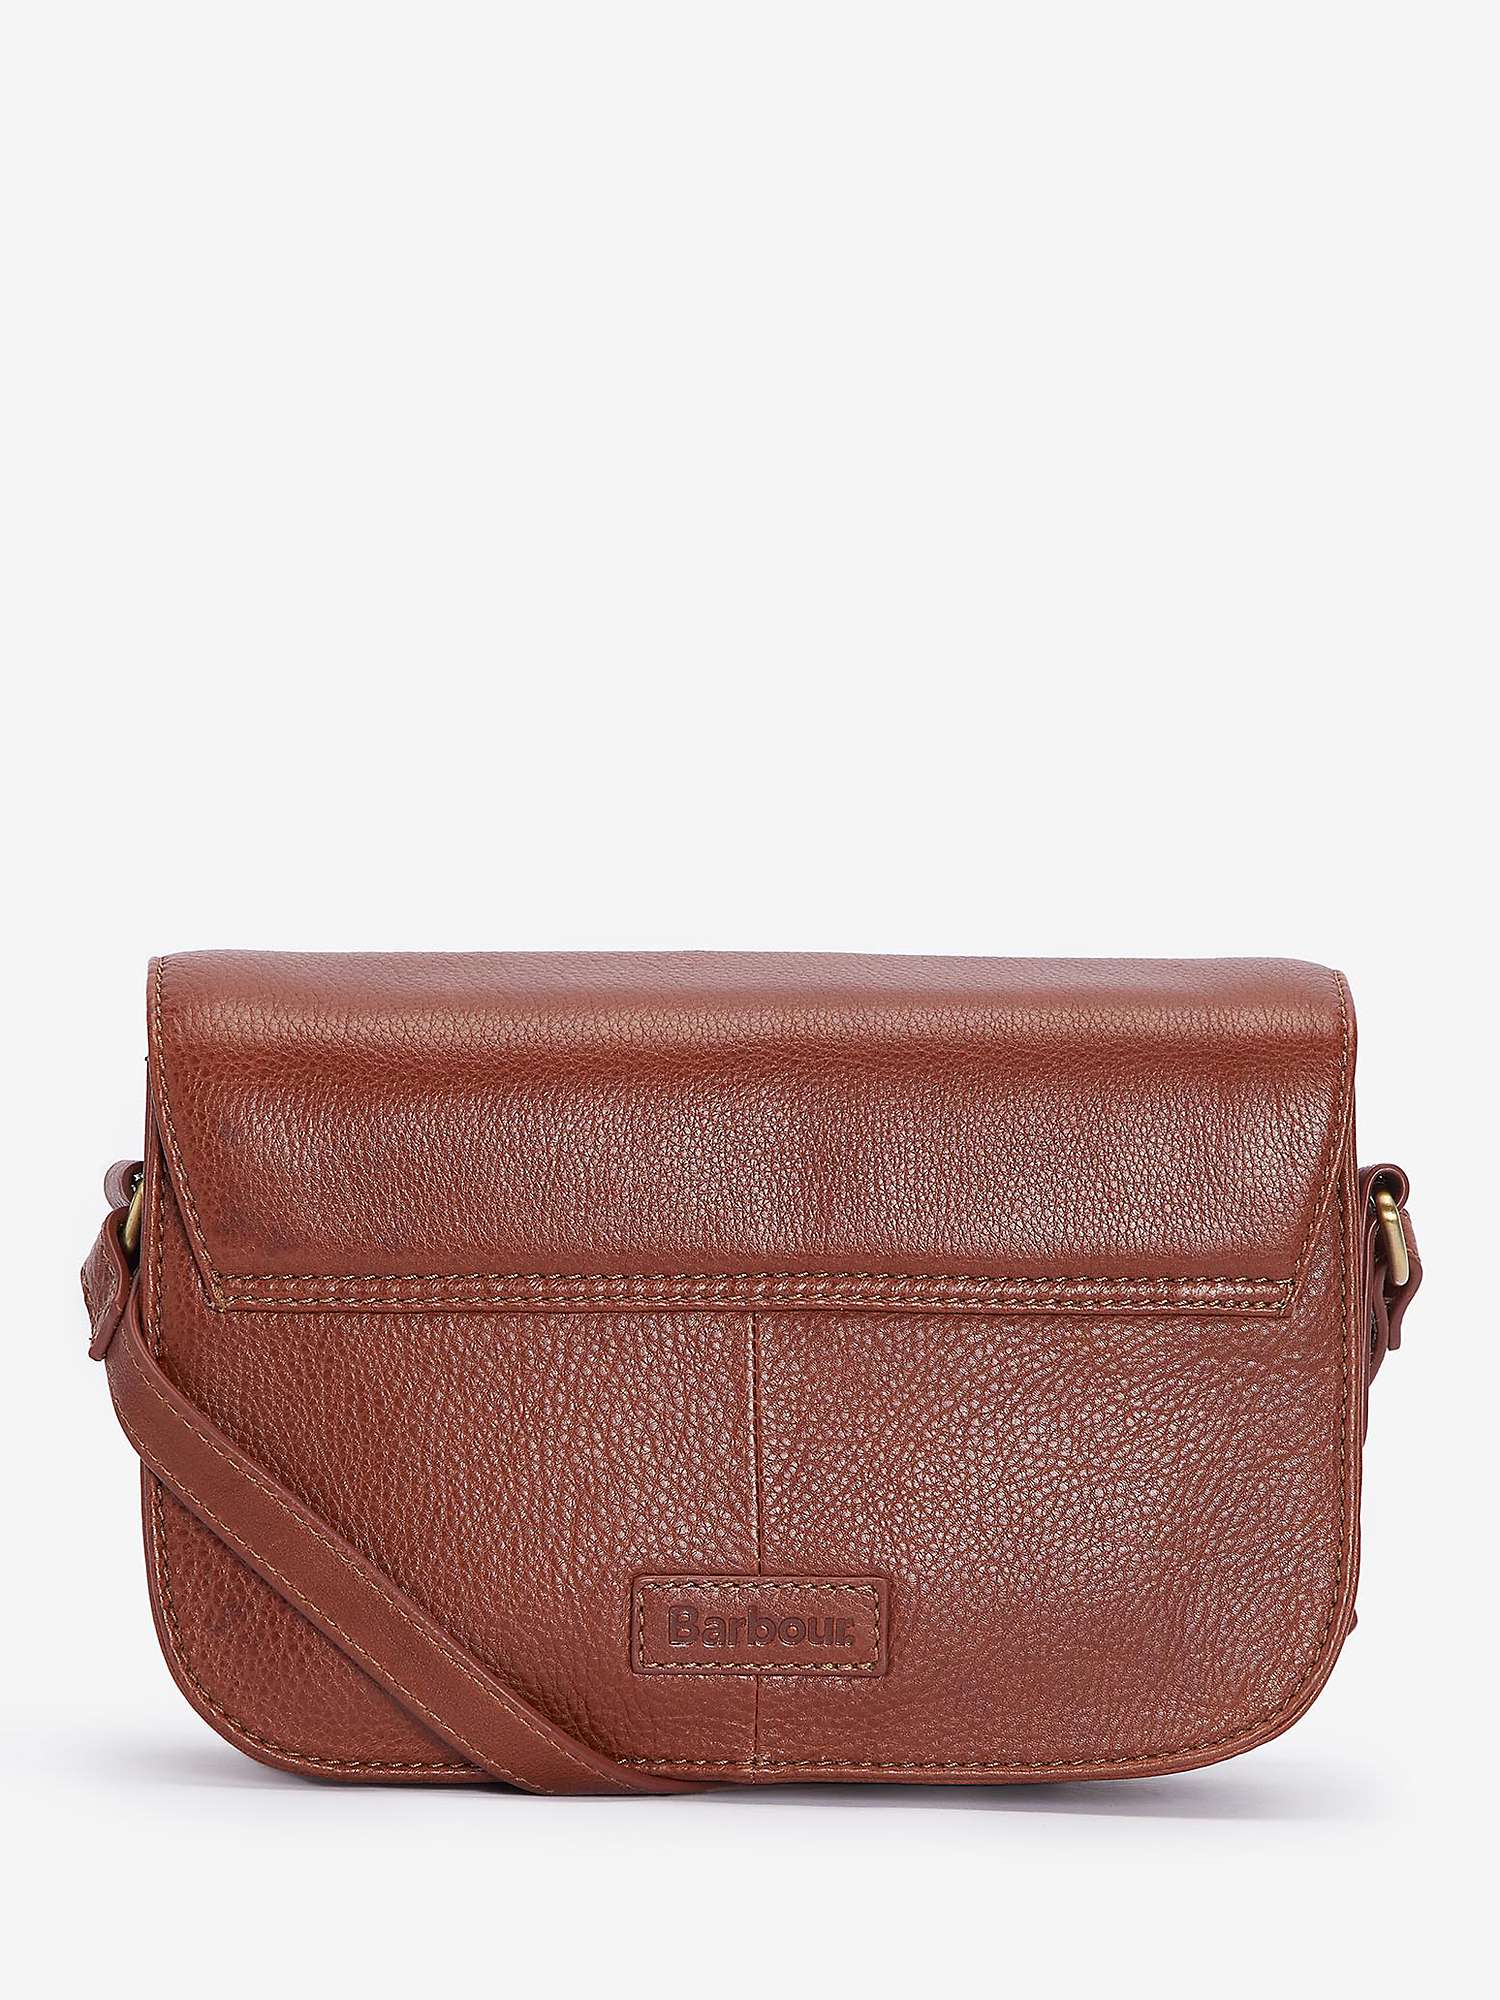 Buy Barbour Isla Leather Cross Body Bag, Brown Online at johnlewis.com